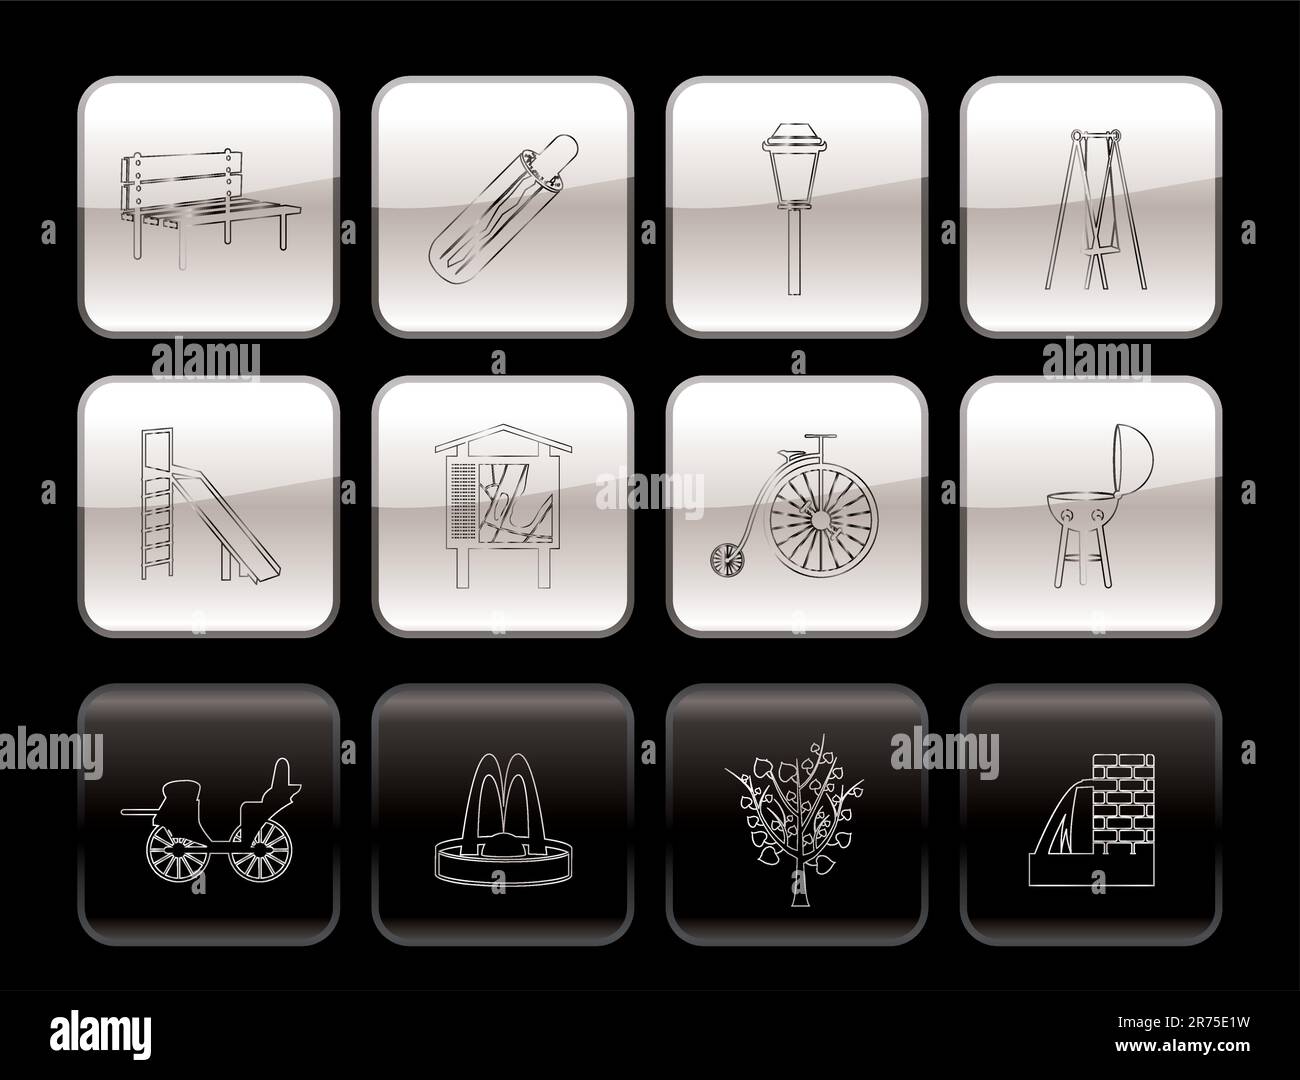 Park objects and signs icon - vector icon set Stock Vector